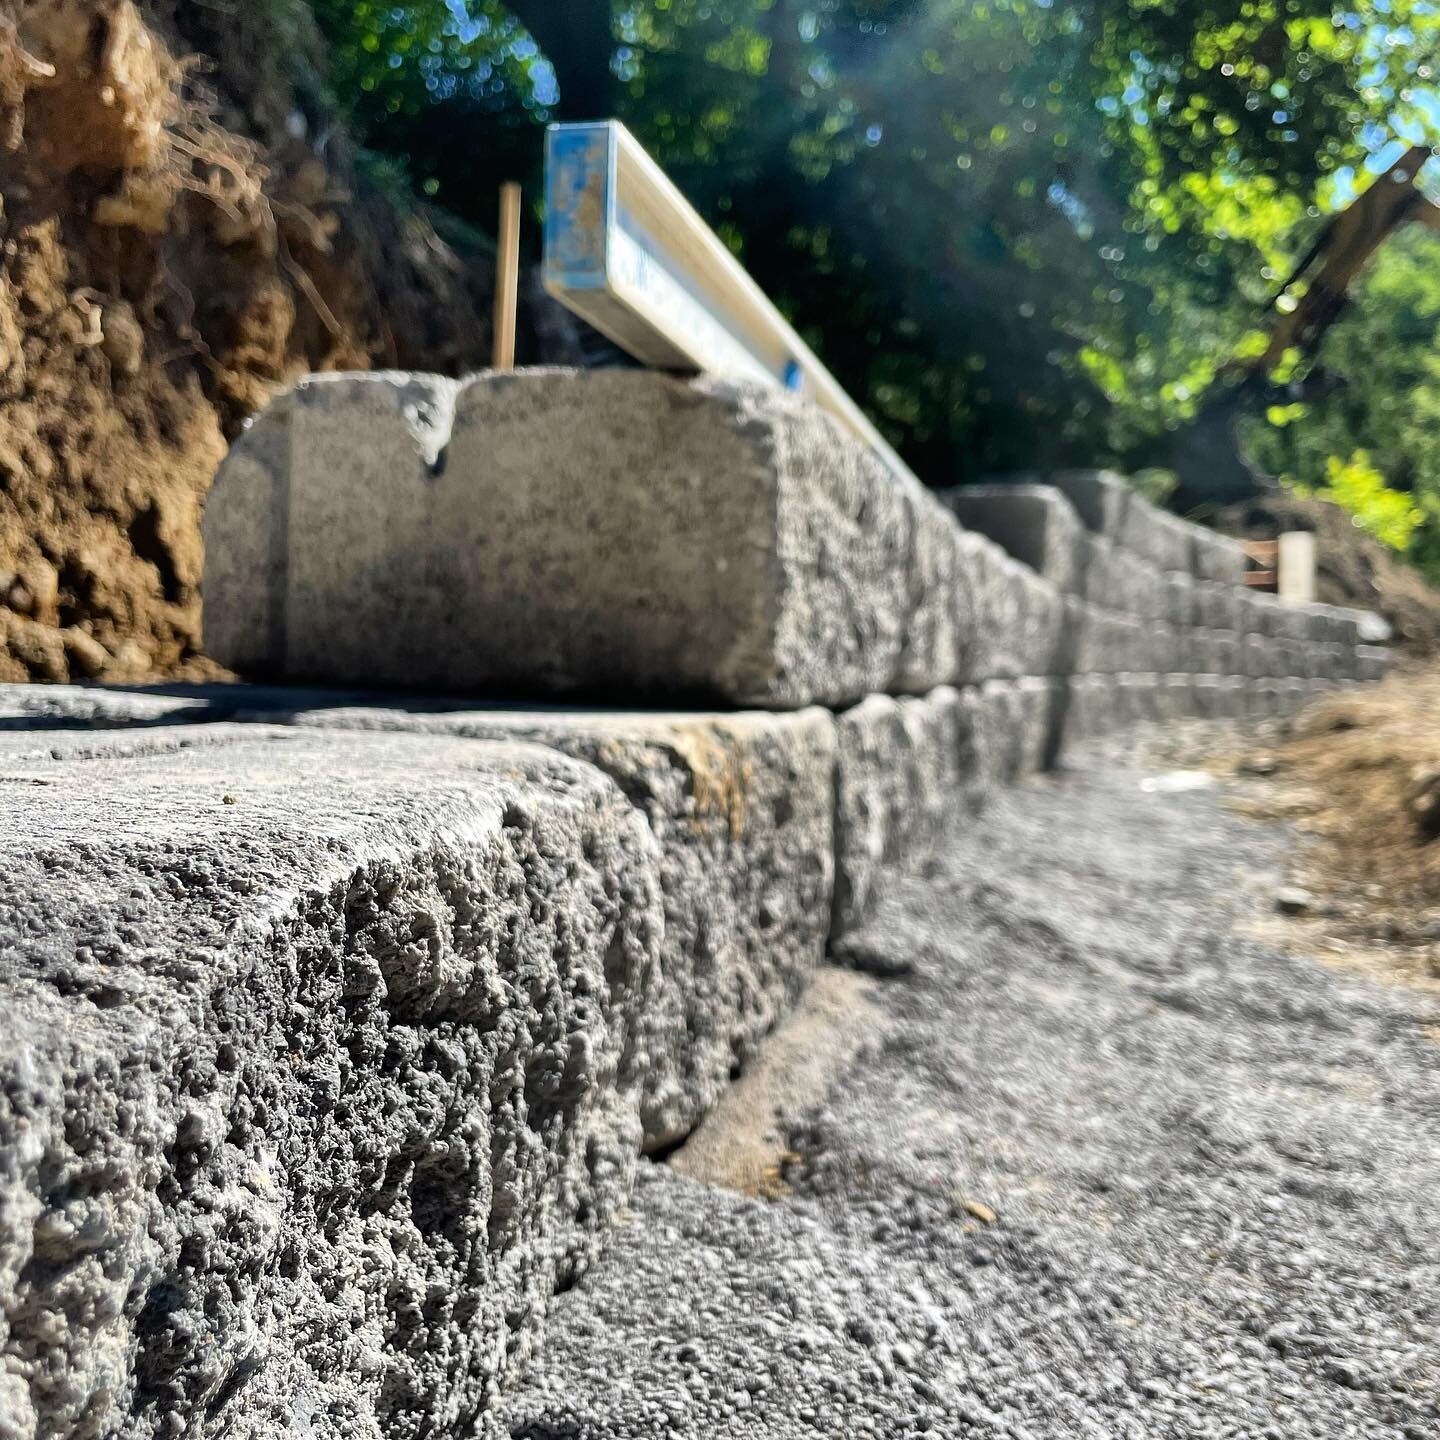 📐Retaining wall going in with detail &amp; precision 📐
.
.
.
.
.
.
.
.
.
.
.
#amazinglandscapes #landscapeideas #outdoorliving #backyardgoals #luxuryhomes #backyardtransformation #luxurybackyard #backyarddesigns #retainingwall #backyardlandscaping 